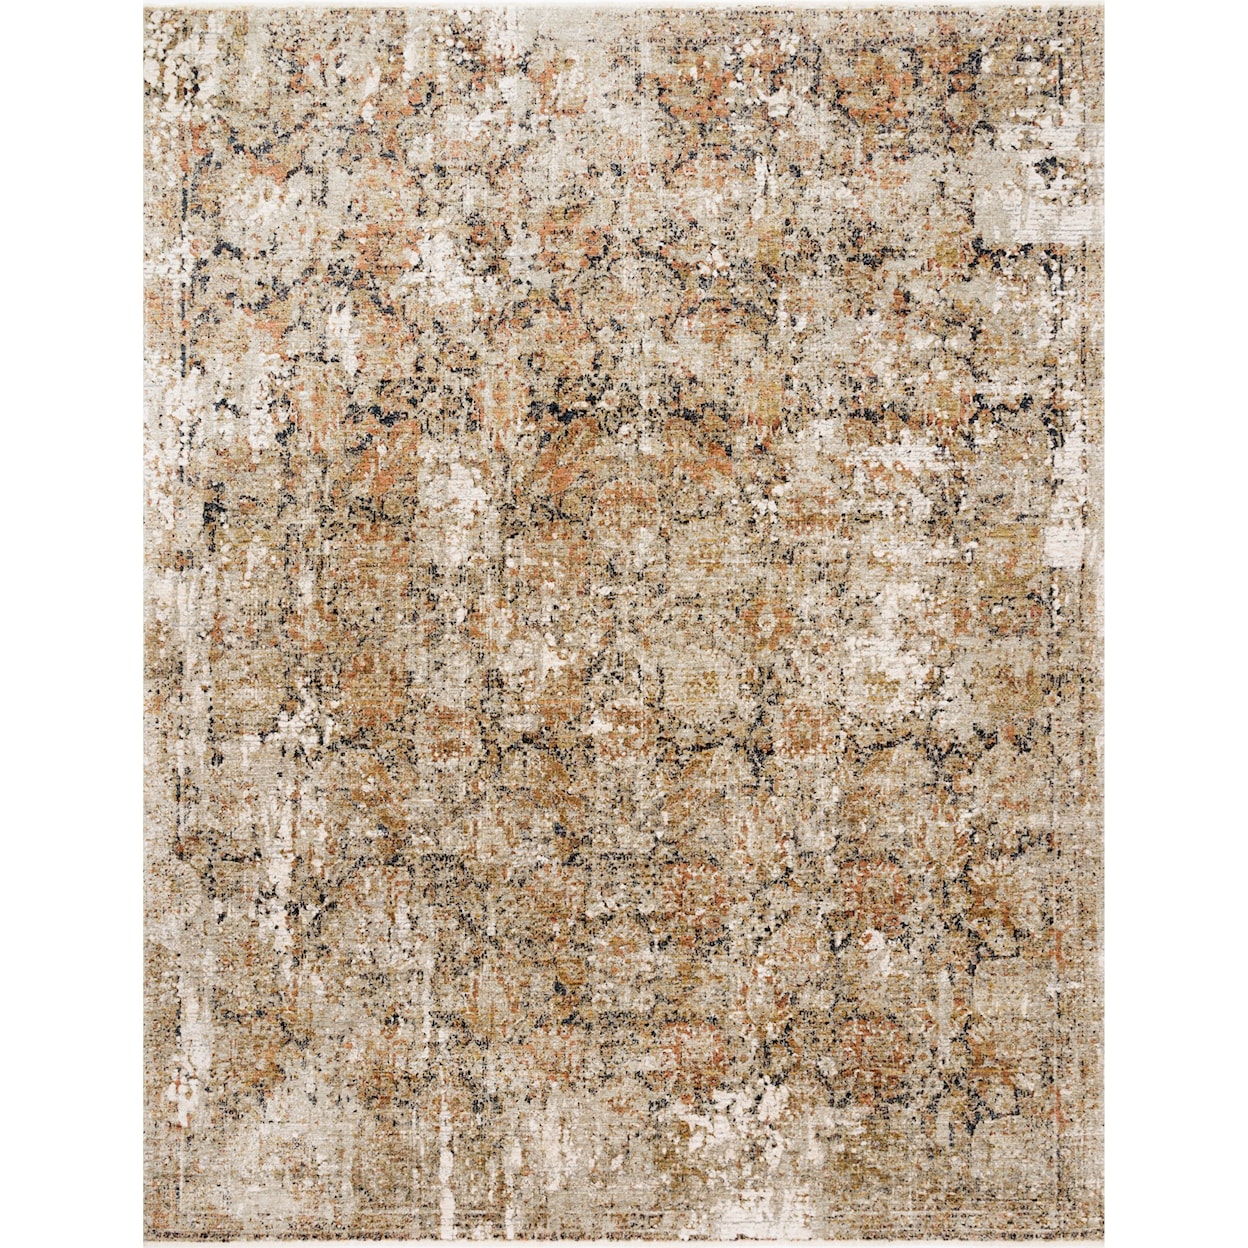 Reeds Rugs Theia 7'10" x 10' Taupe / Gold Rug